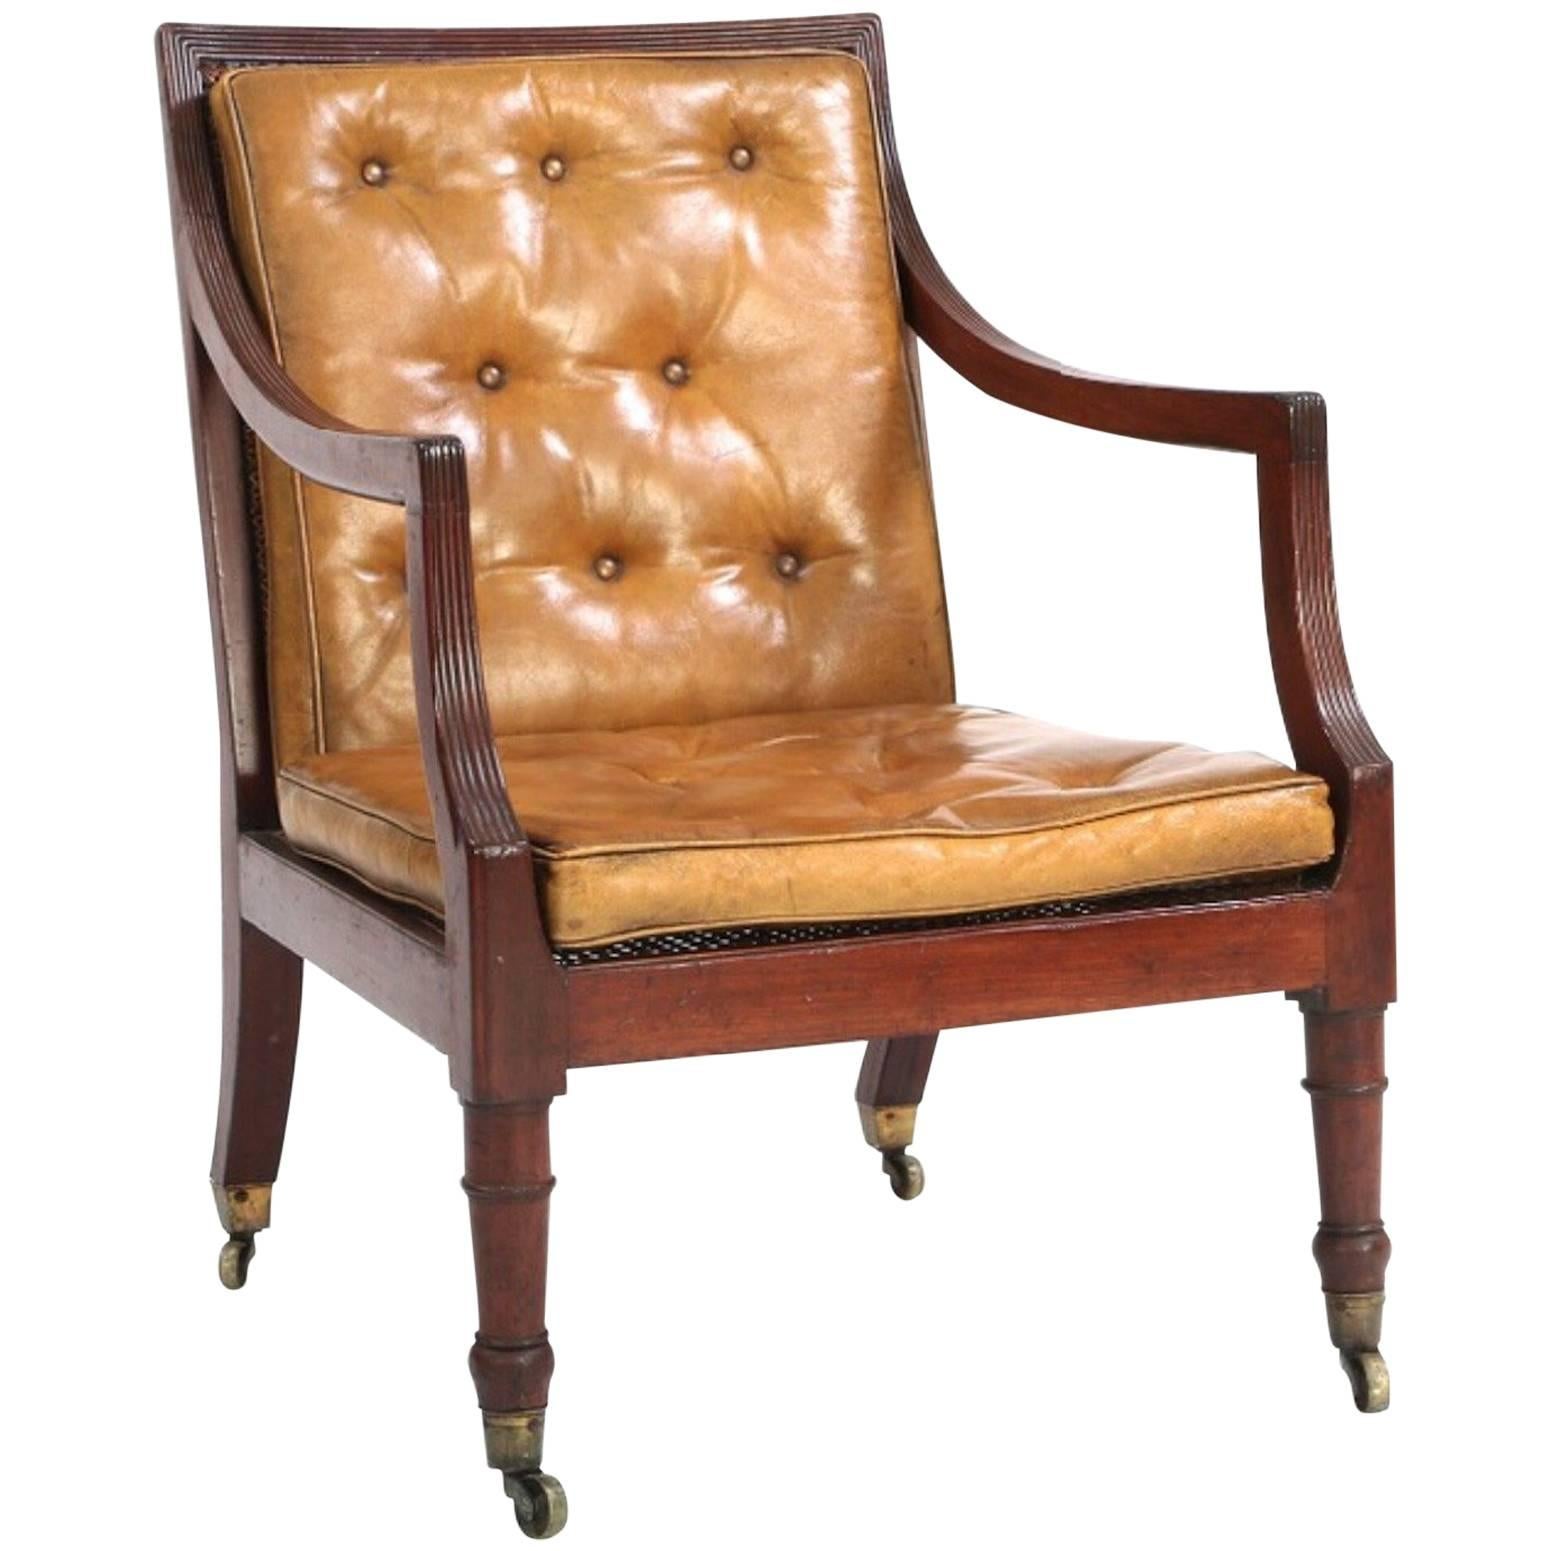 George III Mahogany & Cane Arm or Library Chair, England, c. 1800